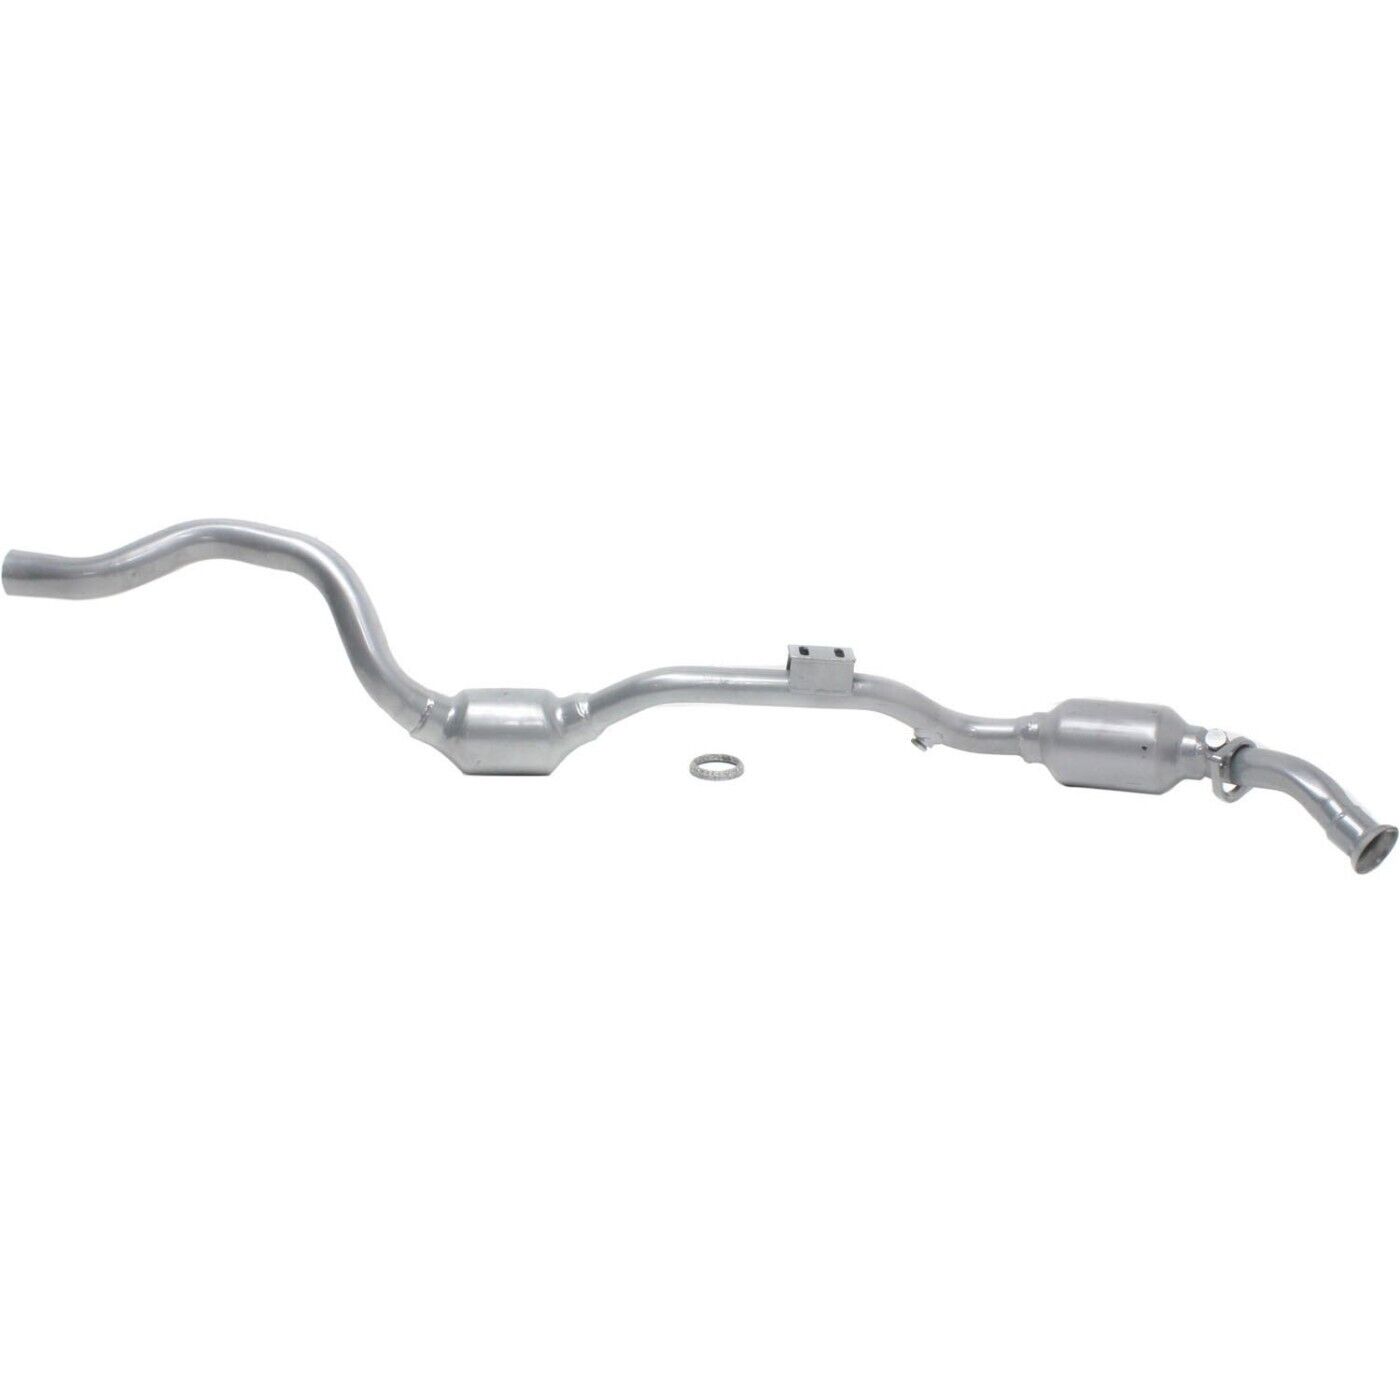 Catalytic Converter For 1998-2003 Mercedes Benz ML320 3.2L 6Cyl Right Side